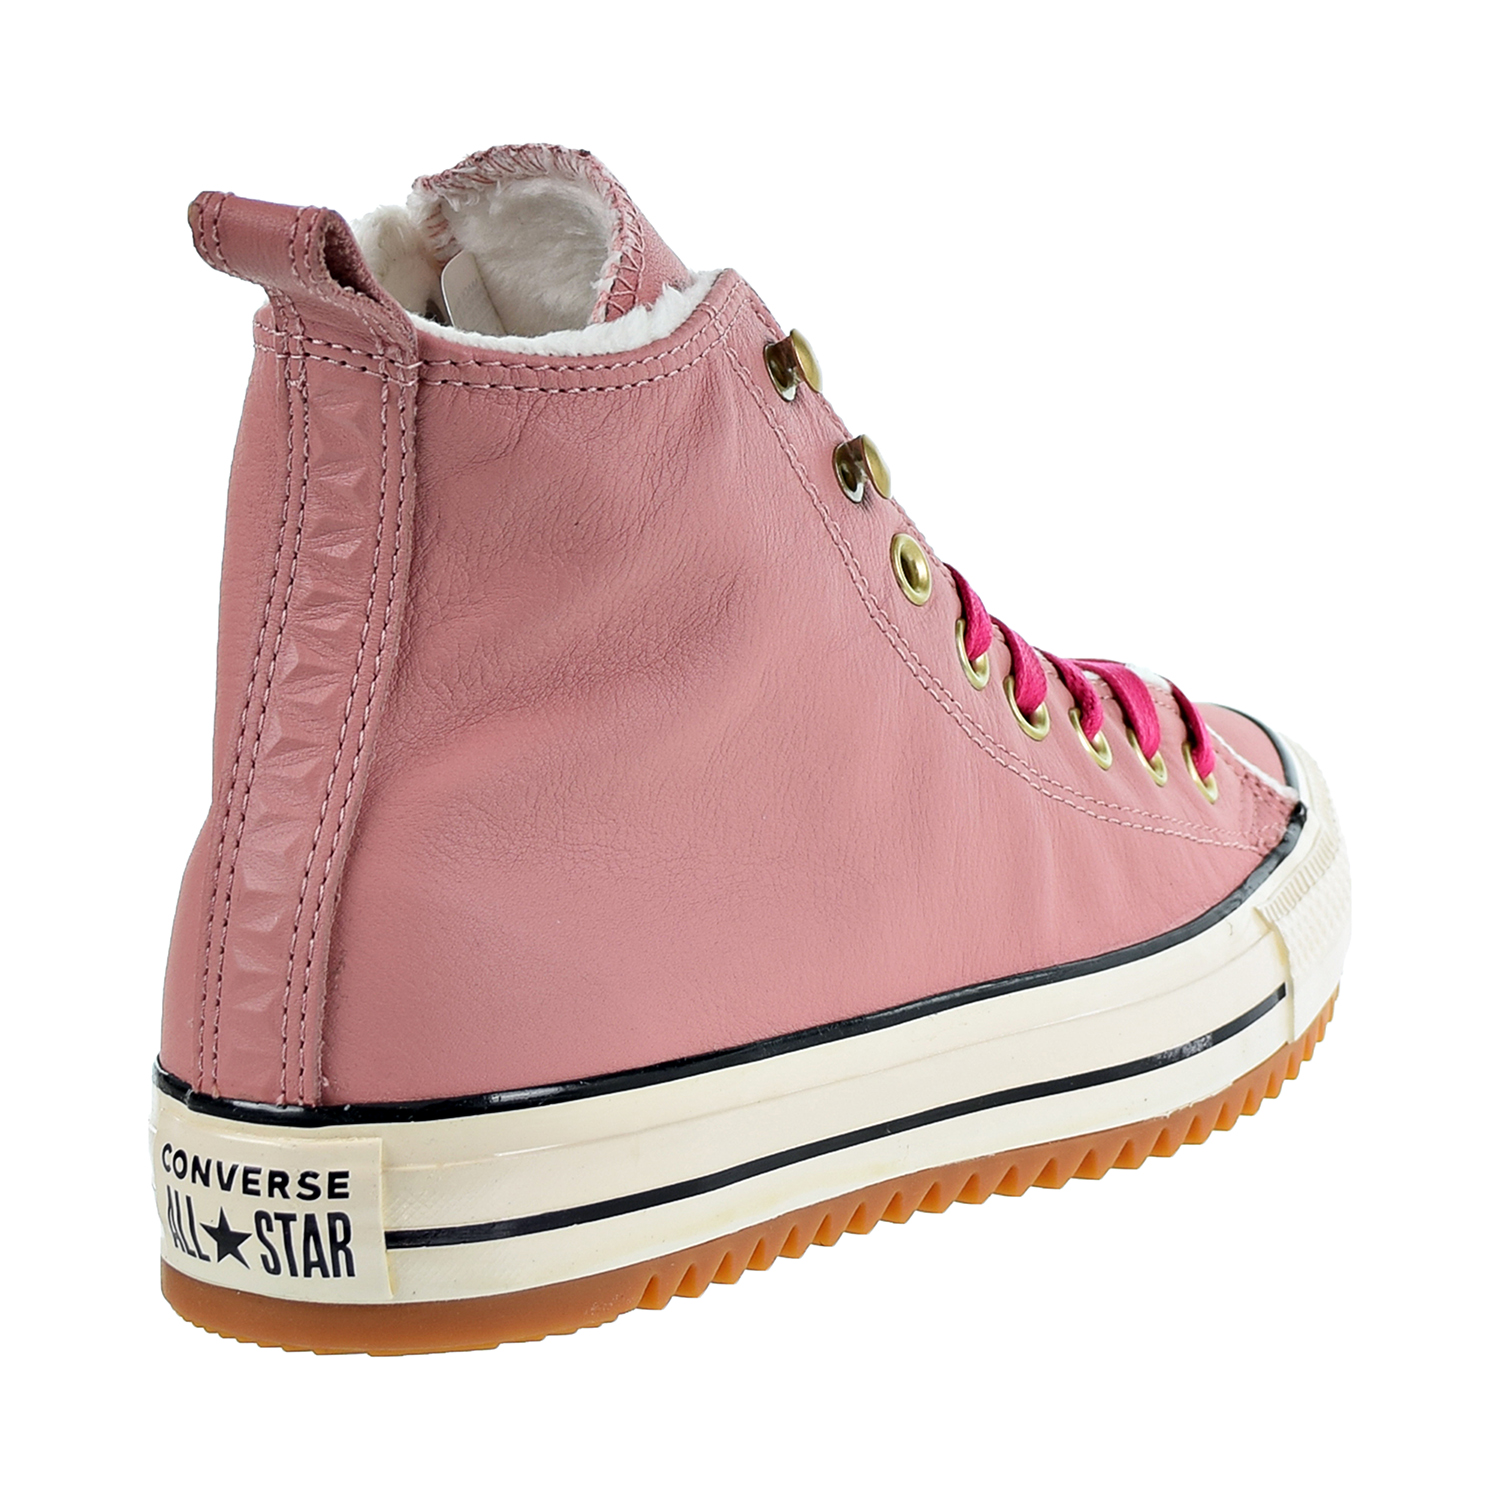 Converse Chuck Taylor All Star Hiker Boot Hi Unisex Sneakers Rust Pink-Pink Pop 162477c - image 3 of 6